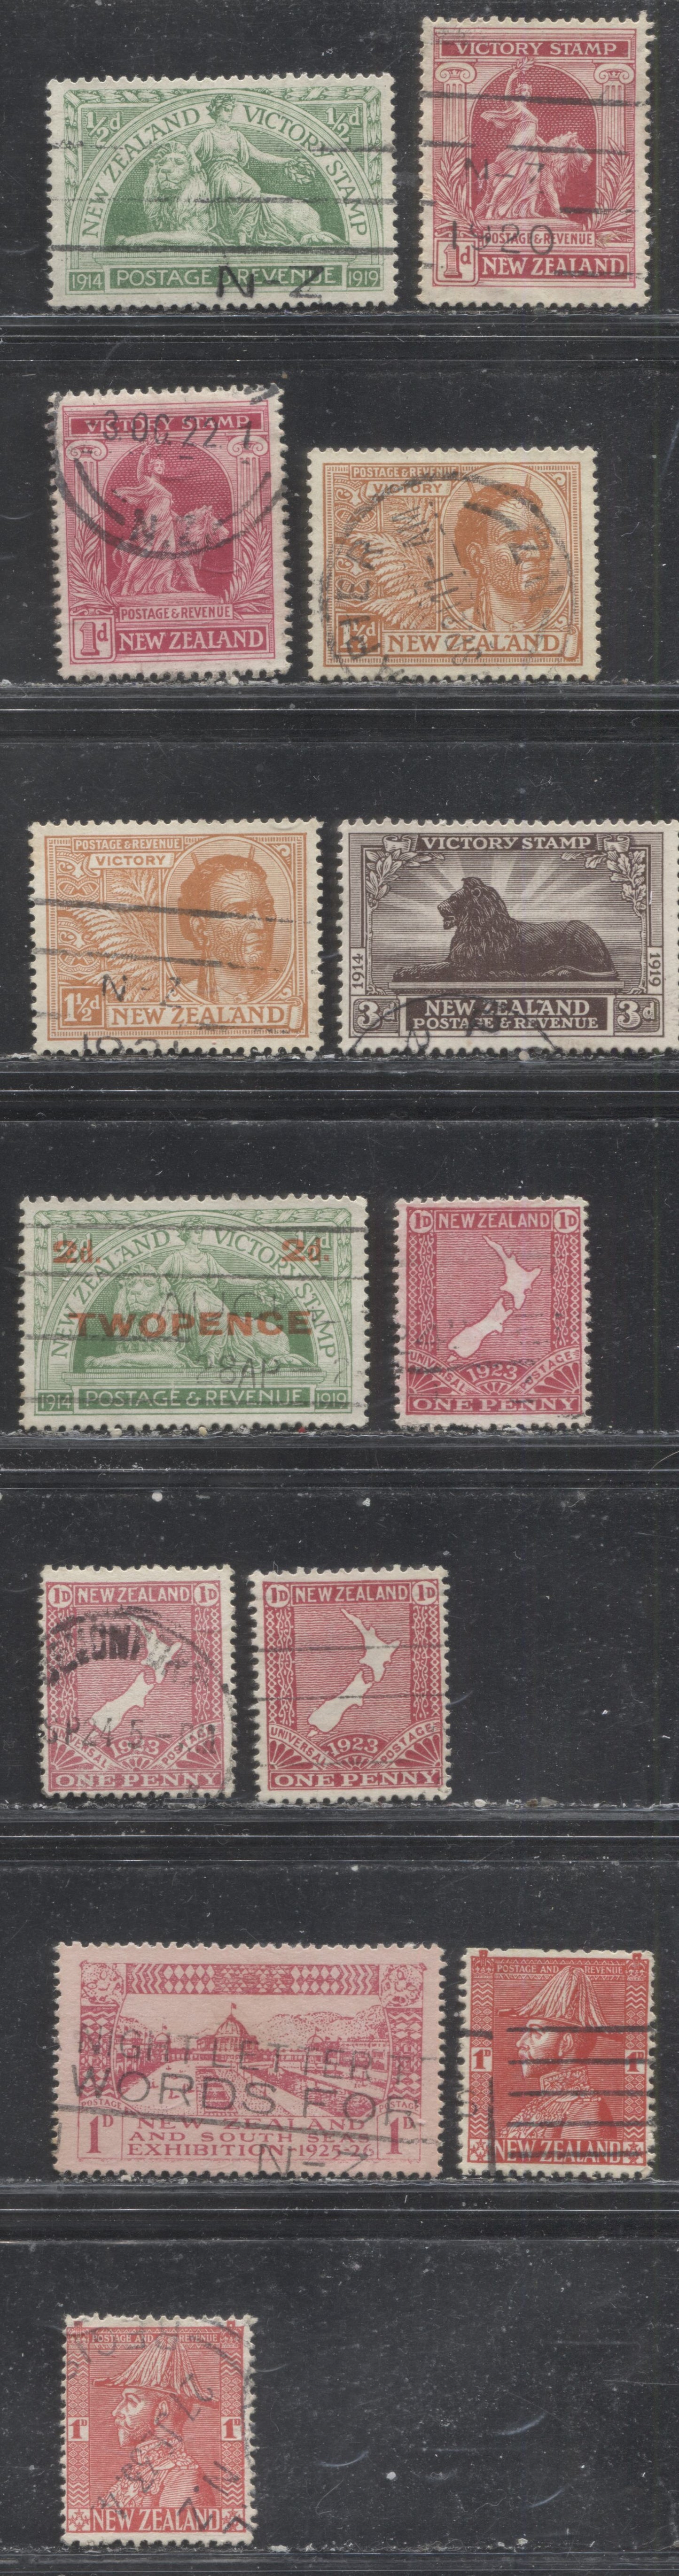 Lot 181 New Zealand SG#453/468e 1/2d - 3d Green - Blackish Brown Various Designs, 1920-1926 Commemorative Issues, 13 Fine and VF Used Singles, Single Watermark, De La Rue, and Cowan Papers, , Including Listed and Unlisted Shades